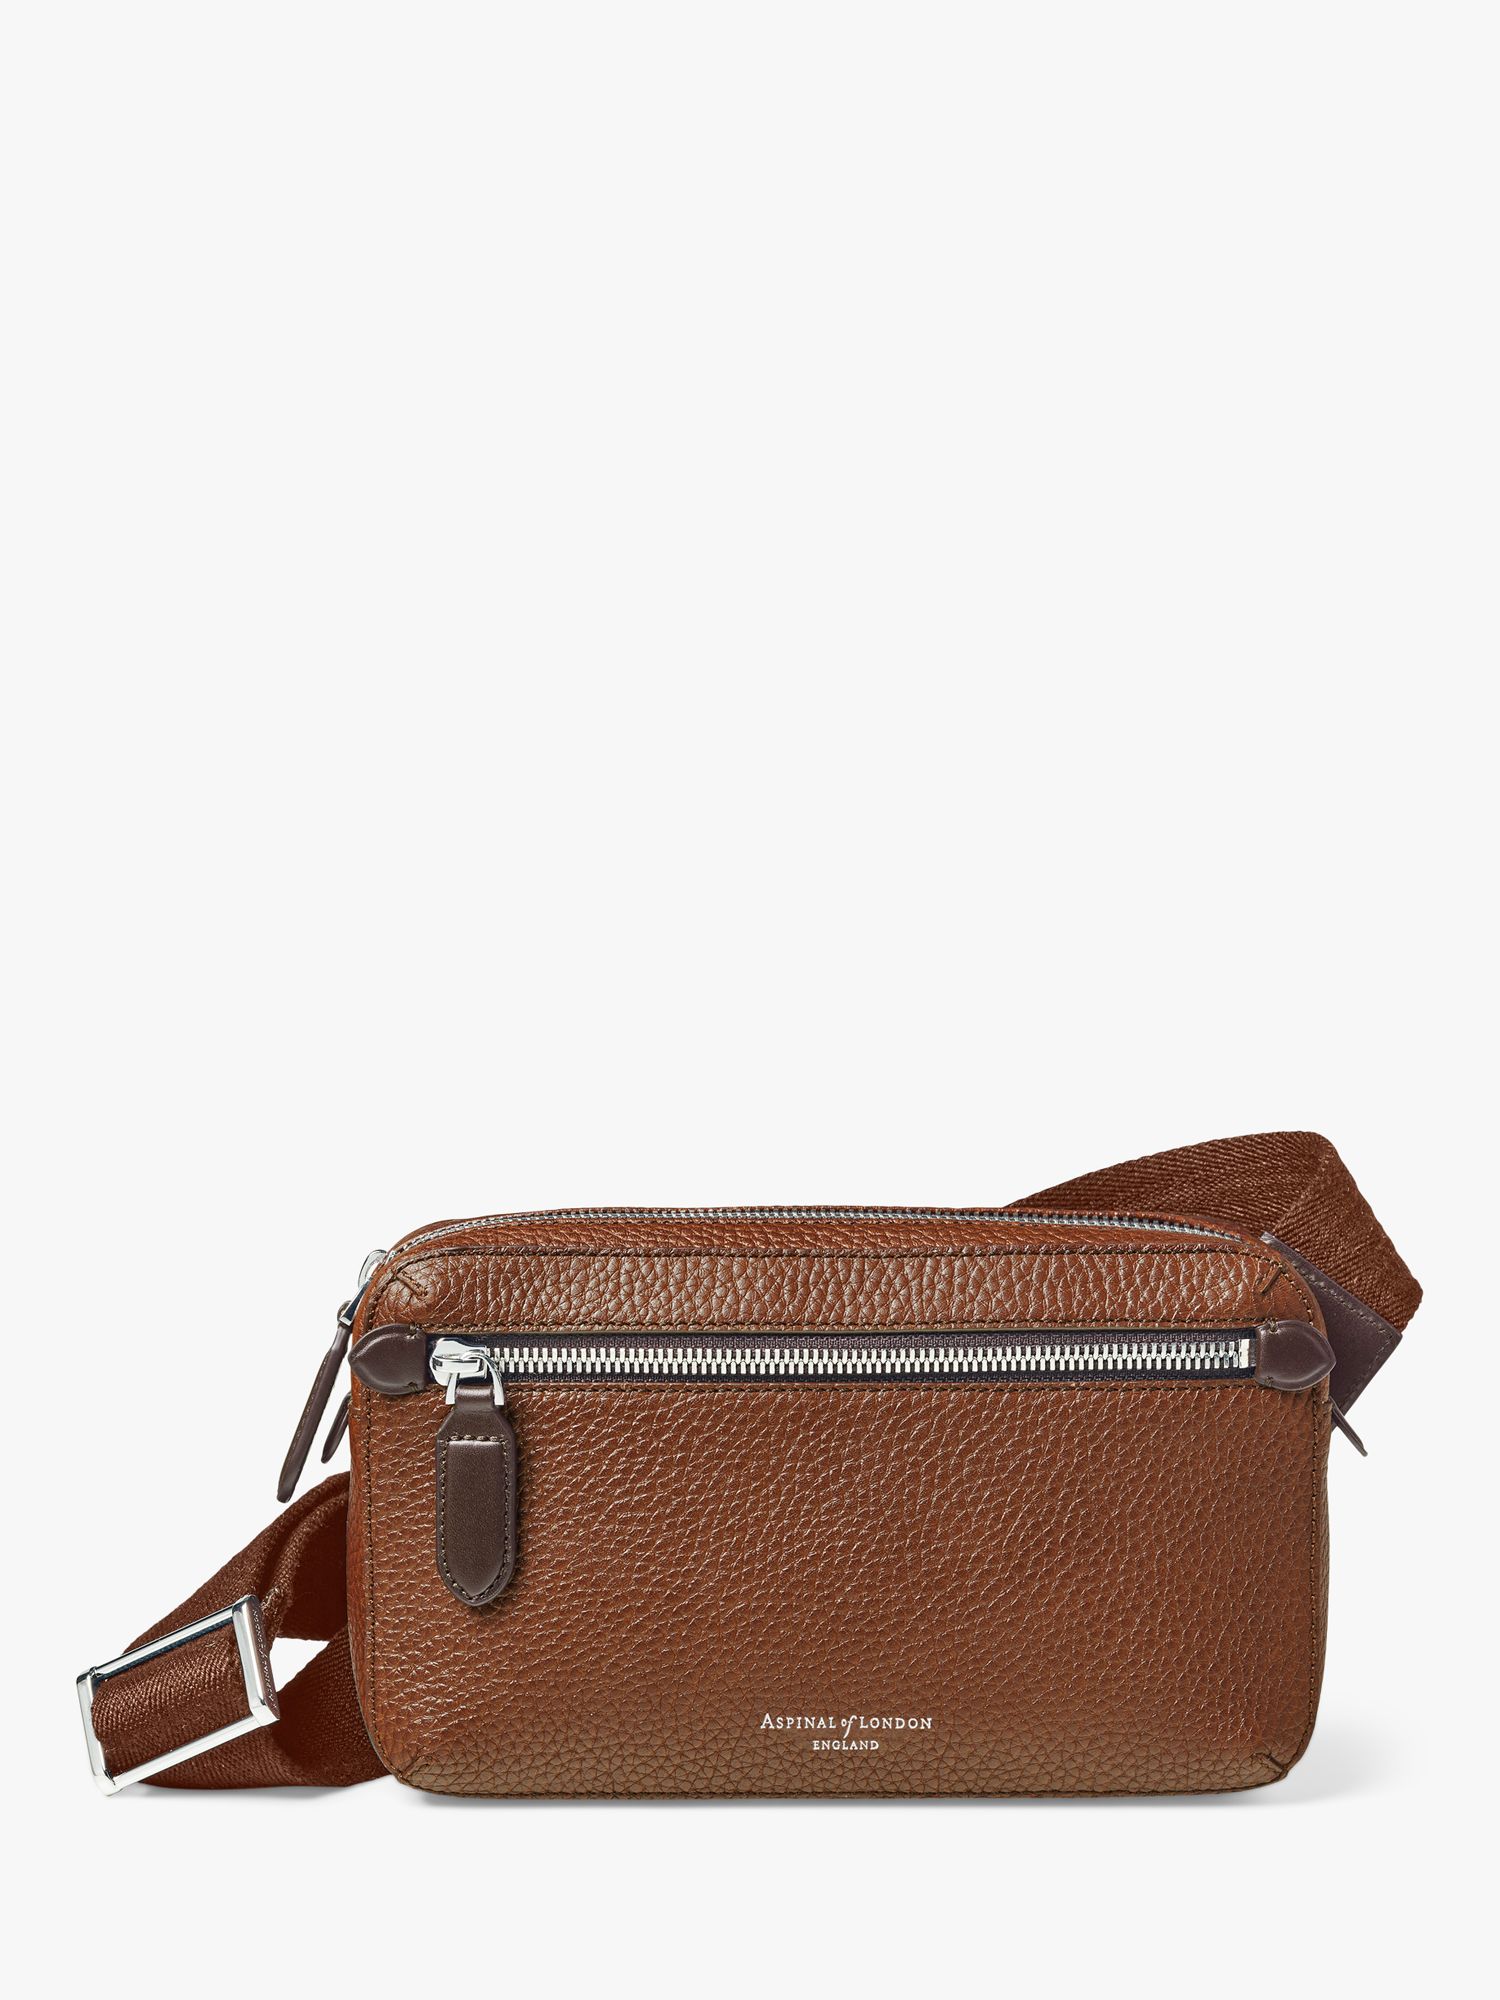 Aspinal of London Compact Pebble Leather Reporter Bag, Tobacco at John ...